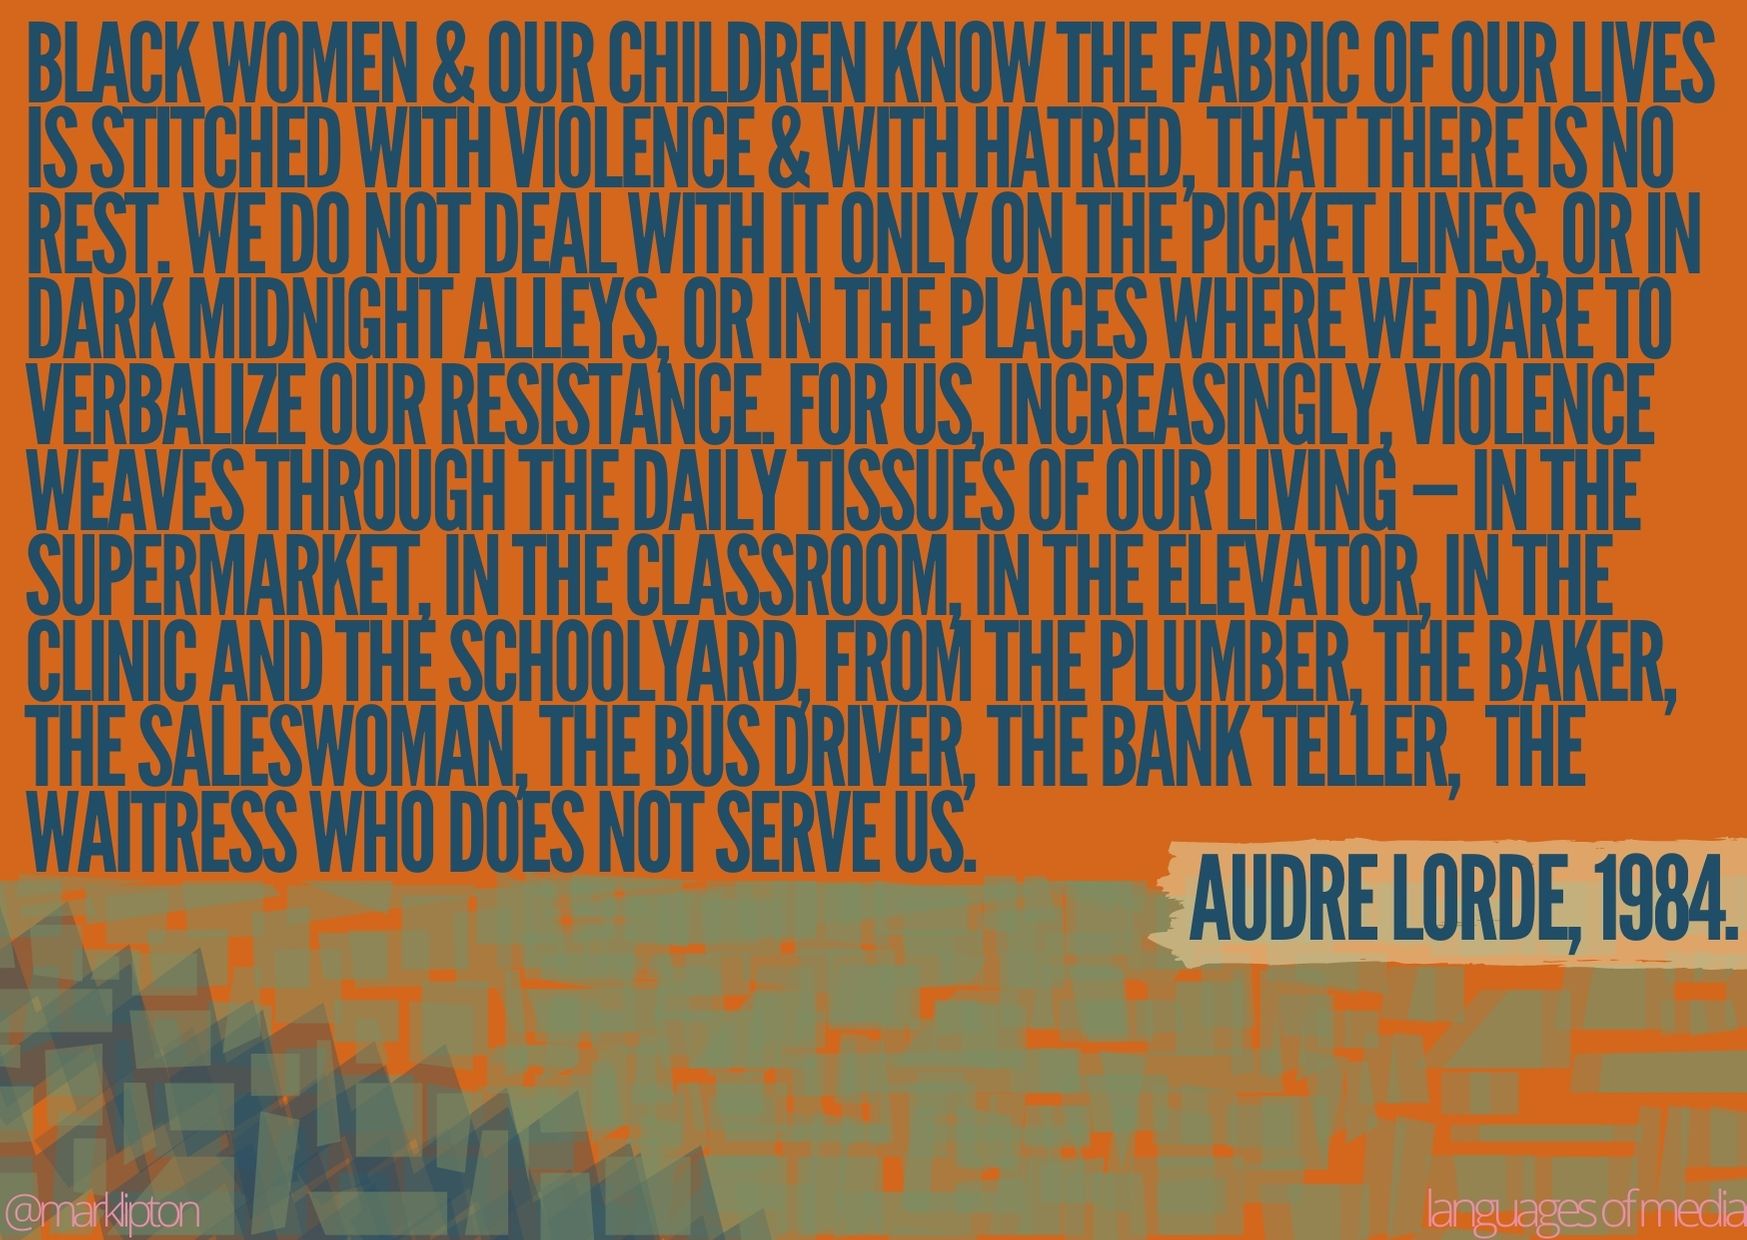 image: Black women & our children know the fabric of our lives is stitched with violence & with hatred, that there is no rest. We do not deal with it only on the picket lines, or in dark midnight alleys, or in the places where we dare to verbalize our resistance. For us, increasingly, violence weaves through the daily tissues of our living — in the supermarket, in the classroom, in the elevator, in the clinic and the schoolyard, from the plumber, the baker, the Saleswoman, the bus driver, the bank teller, the waitress who does not serve us. Audre Lorde 1984.